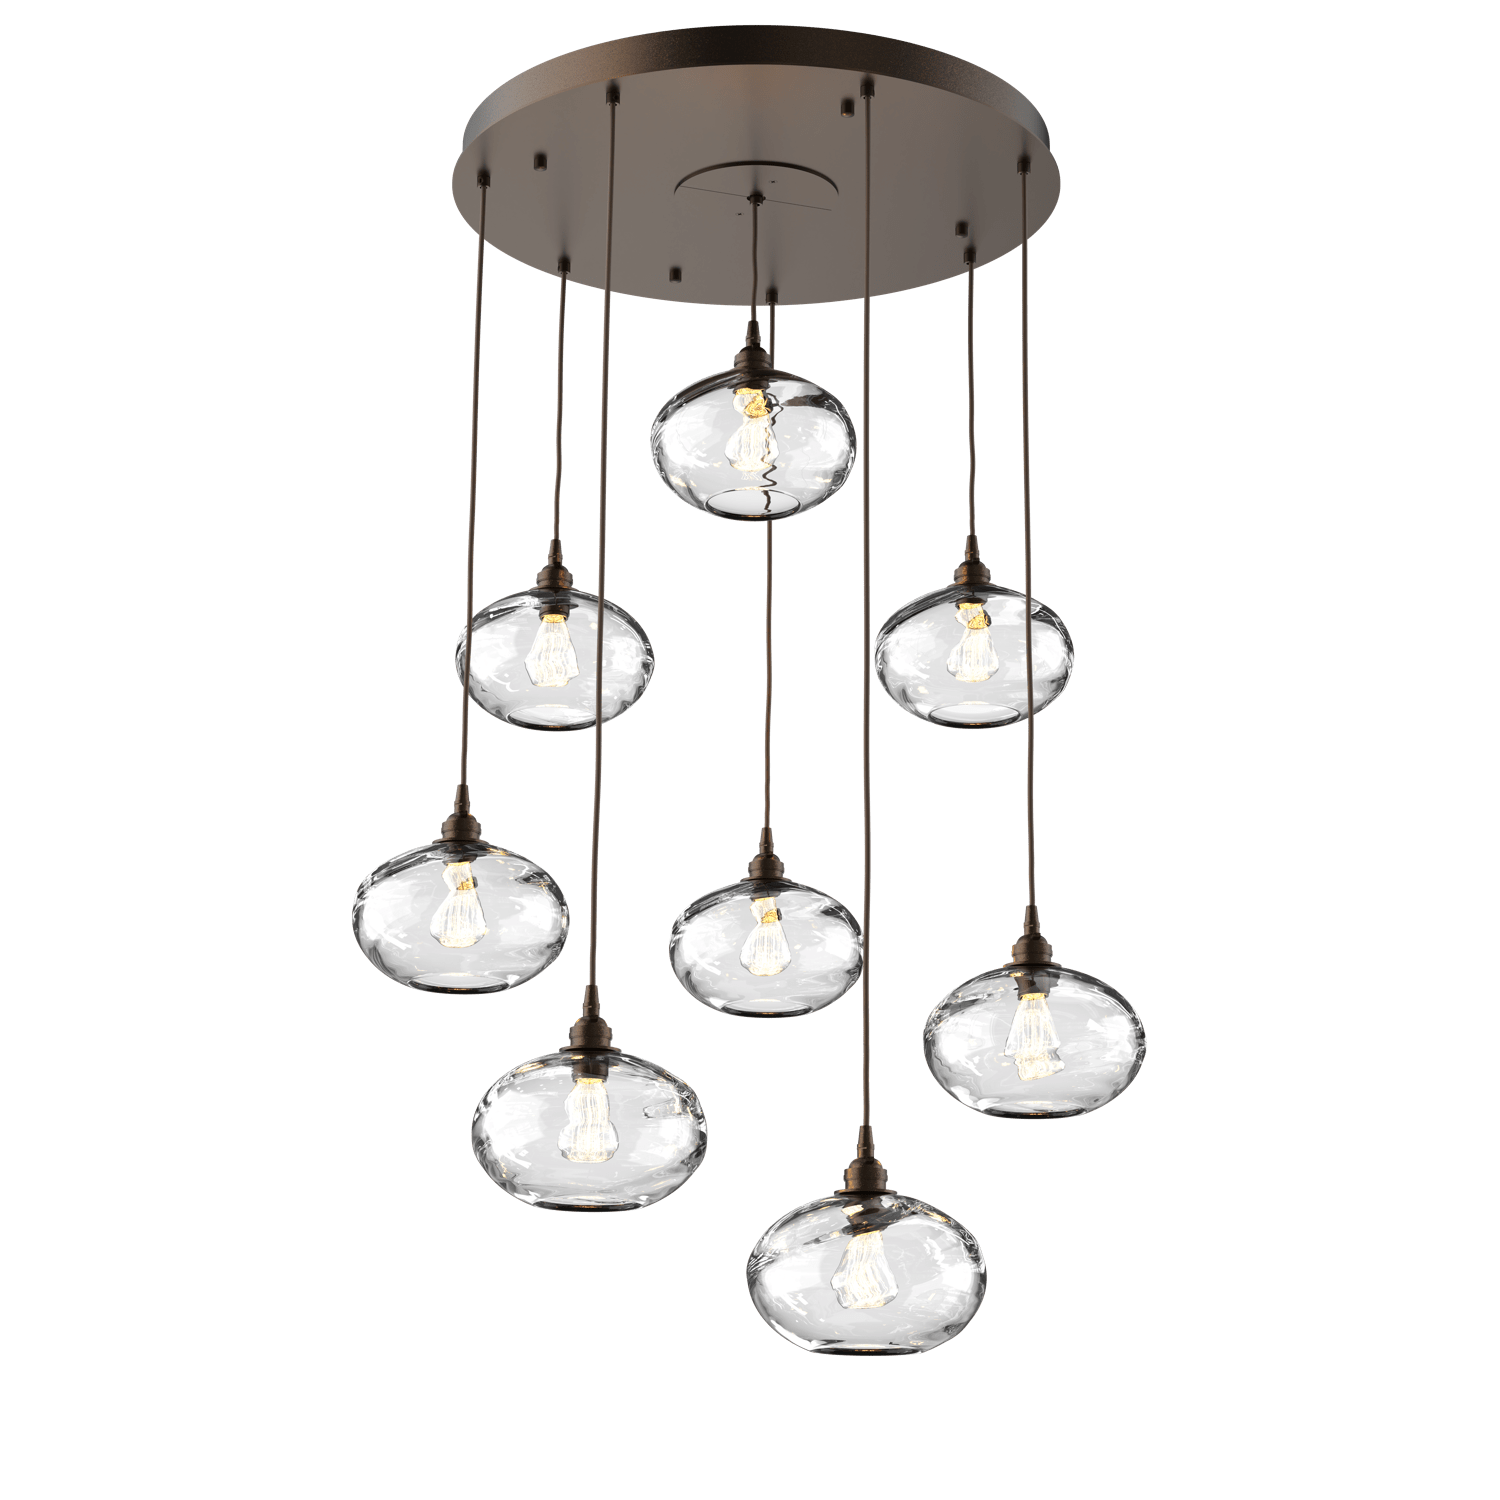 CHB0036-08-FB-OC-Hammerton-Studio-Optic-Blown-Glass-Coppa-8-light-round-pendant-chandelier-with-flat-bronze-finish-and-optic-clear-blown-glass-shades-and-incandescent-lamping